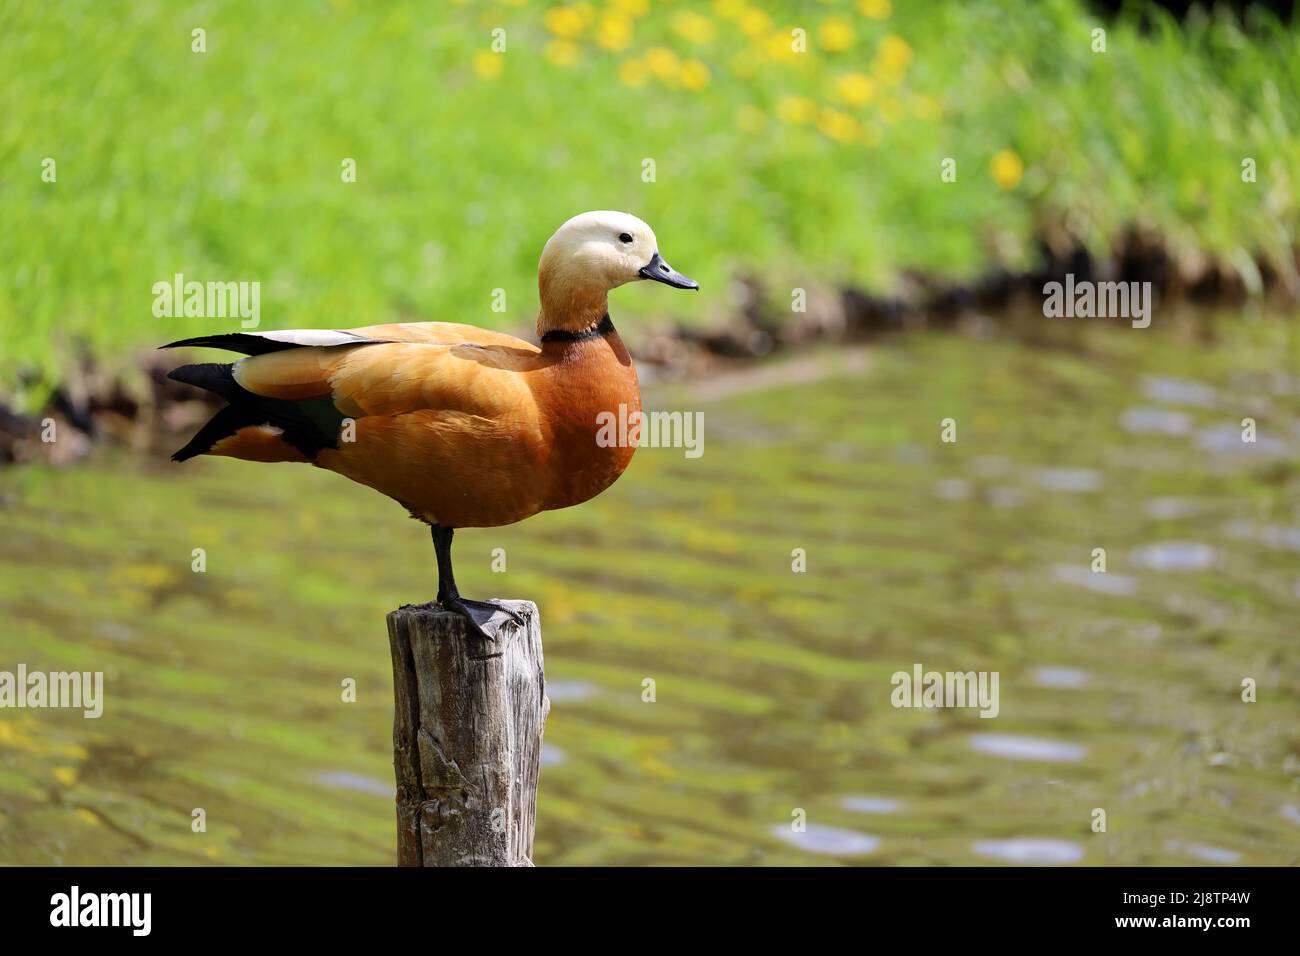 Shelduck (Tadorna ferruginea) standing on old tree trunk in the lake. Male red duck in spring park Stock Photo